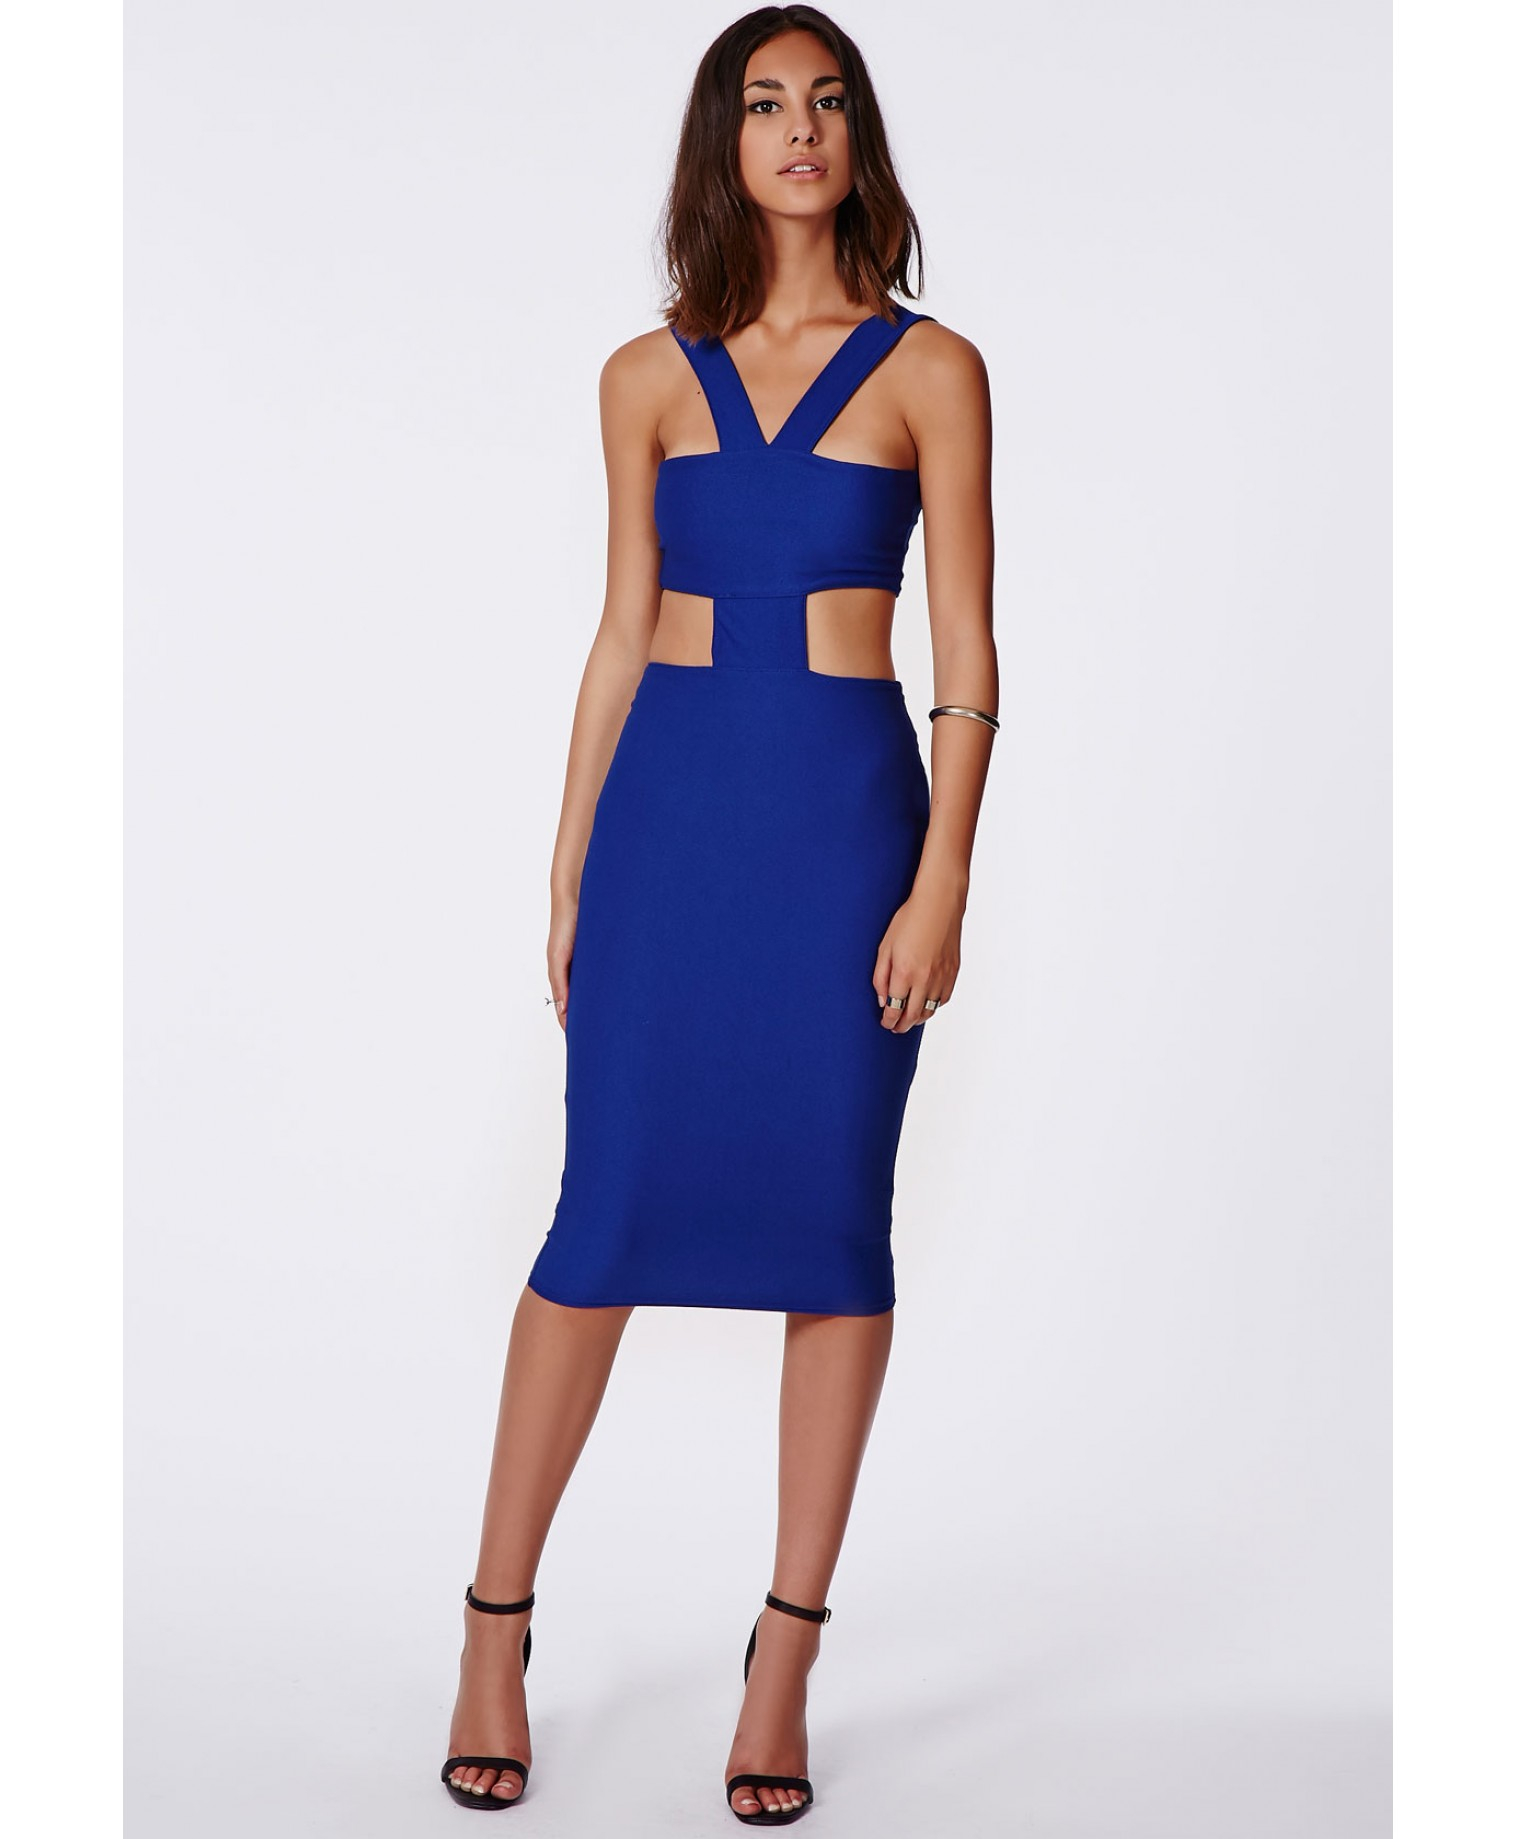 Lyst - Missguided Cut Out Bodycon Midi Dress In Cobalt Blue in Blue